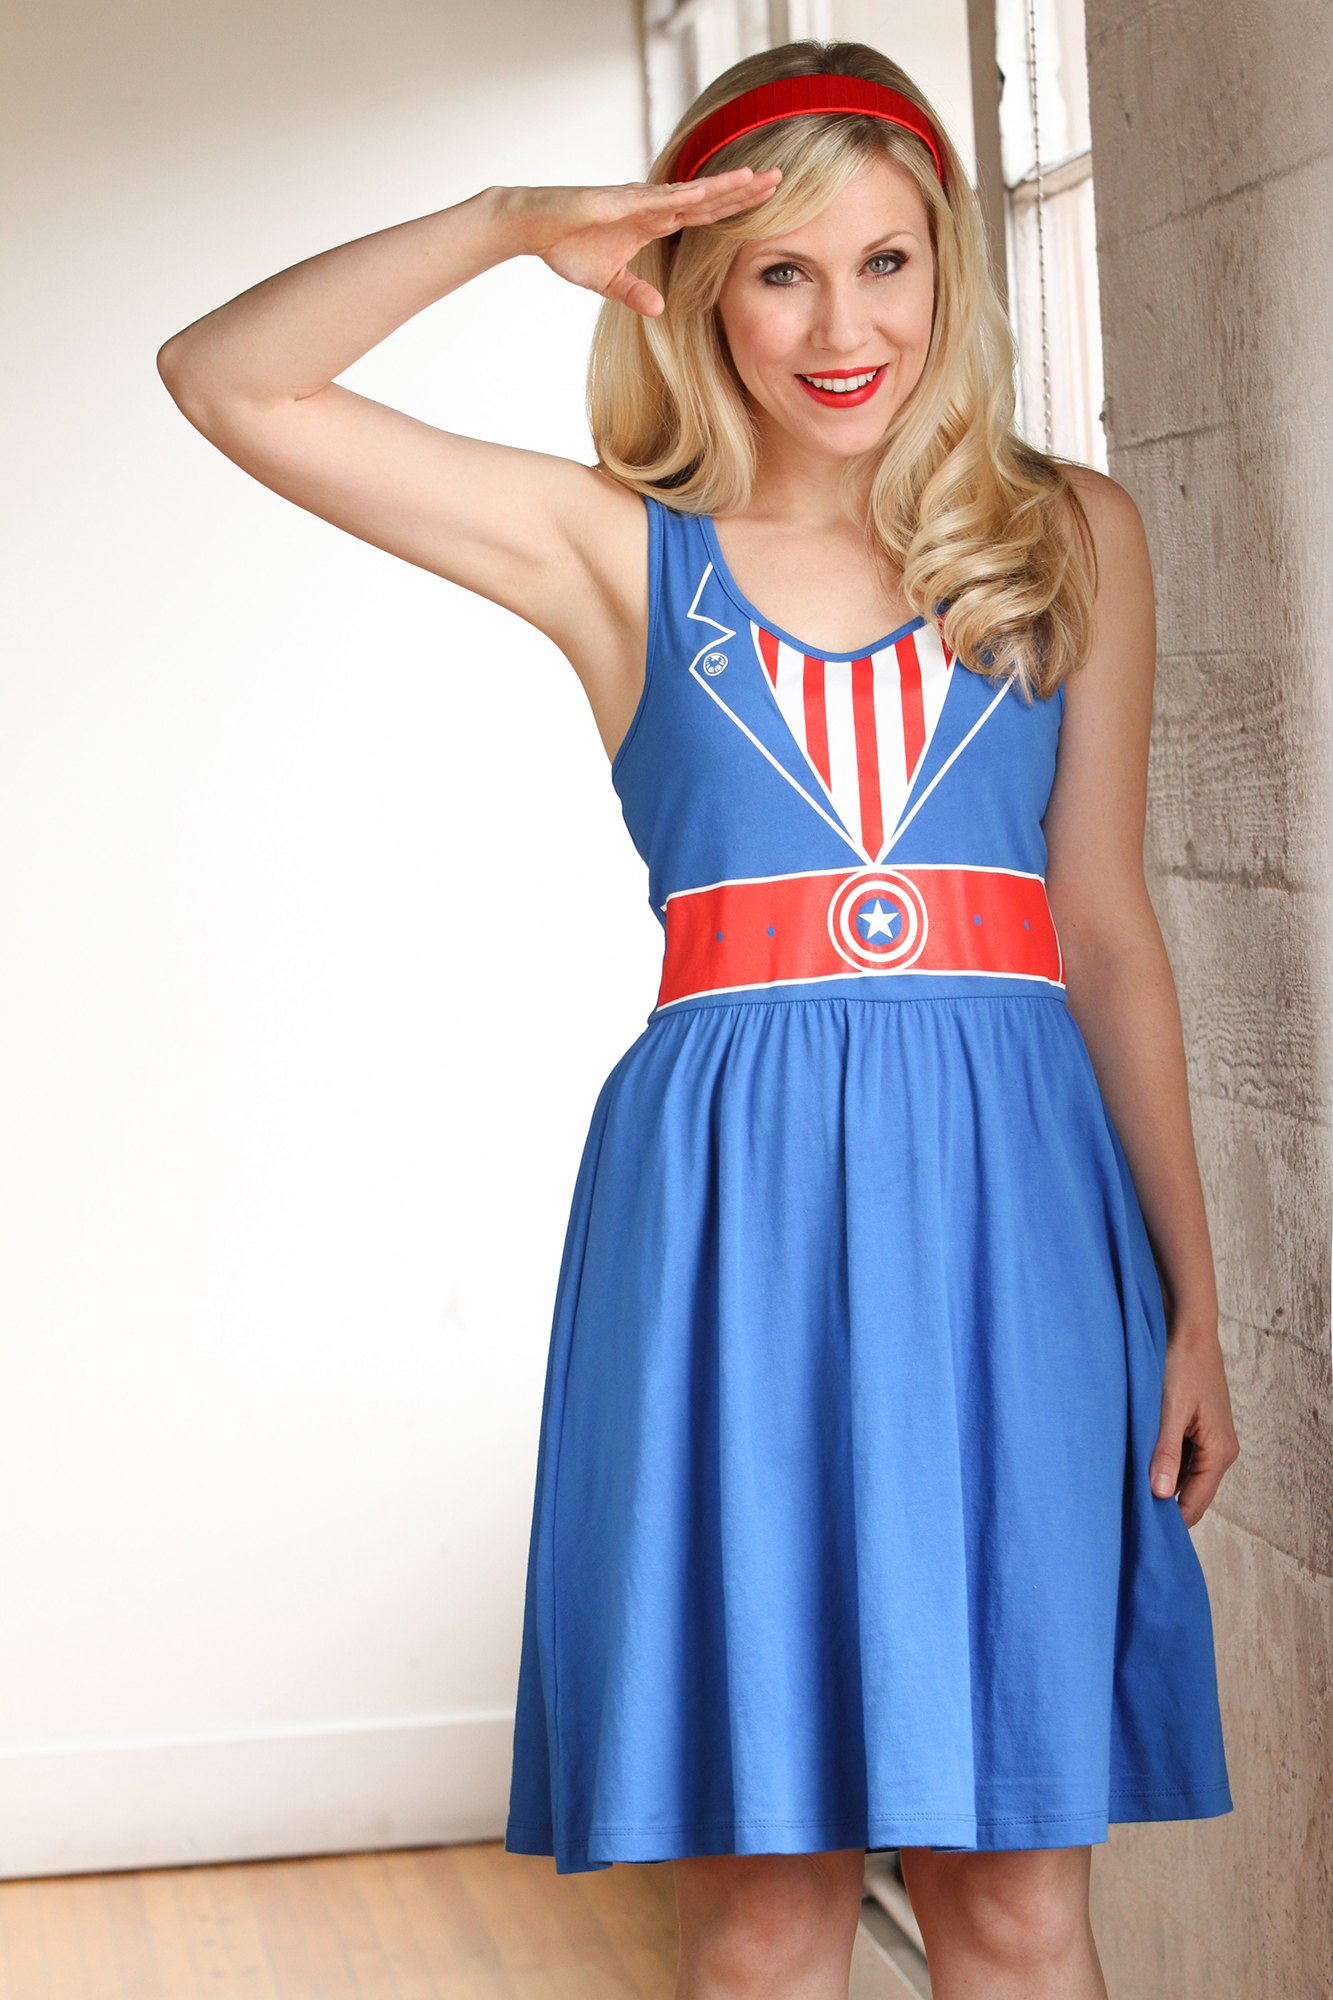 Inspired by Captain America's uniform and the USO girls, Her Universe took elements from both and came up with this dress design! Feel like the First Avenger in this fun A-line dress.